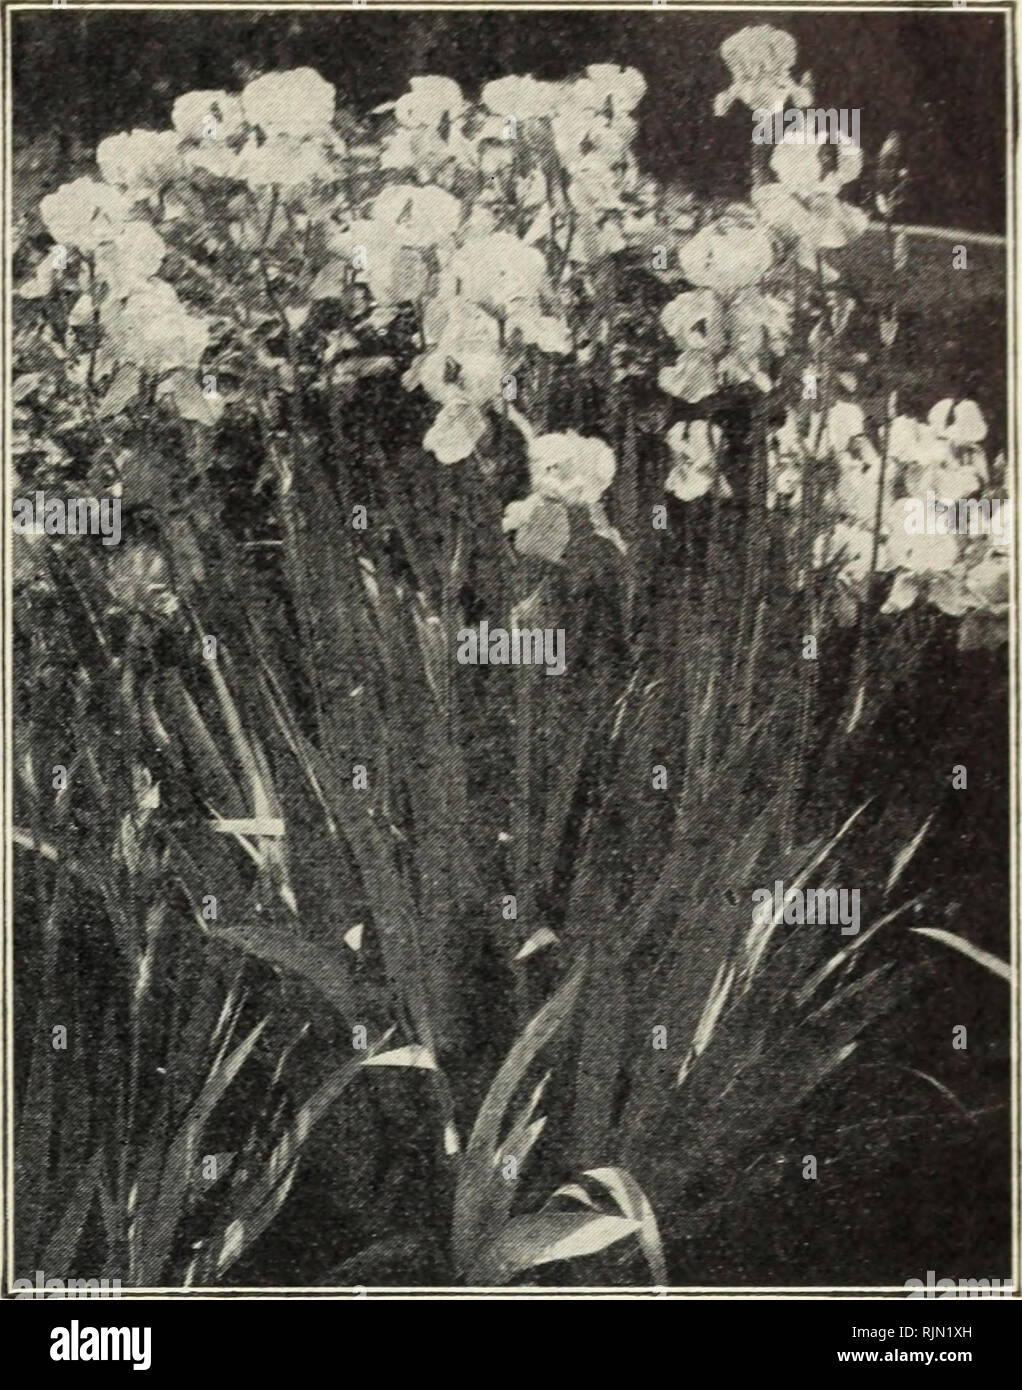 . Barnard's 1927. Seeds Catalogs; Vegetables Seeds Catalogs; Flowers Seeds Catalogs; Nurseries (Horticulture) Catalogs. The W. W. Barnard Co., 231-235 W. Madison St., Chicago 93 Iris Pumila—Early Dwarf Bearded Especially suitable for edging1 of beds and walks, and lovely with early tulips. Atroviolacea. Deep purple. Each, 25c; 3 for 65c Excelsa. Clear deep yellow. Each, 30c; 3 for 80c Hybrida Schneecuppe (Snow Cup). Fine large-flow- ering white. F. slightly reticulated yellow at the base. Each, 40c; 3 for $1.10 Beardless Iris SIBERIAN Orientalis (Syn. Sanguinea). 18-inch, late. Intensely brill Stock Photo